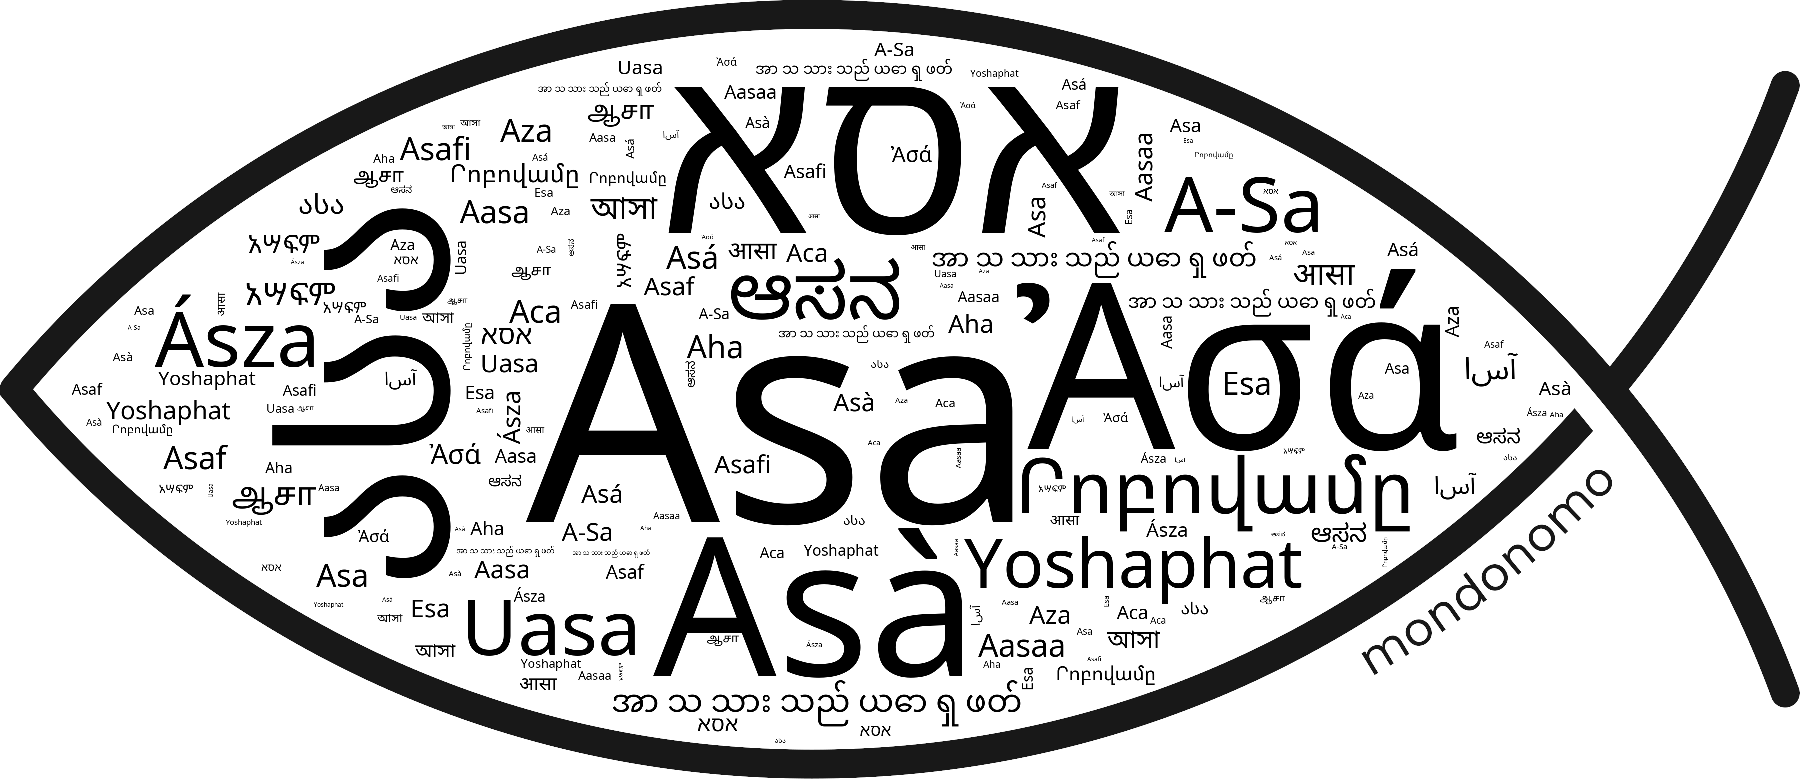 Name Asa in the world's Bibles